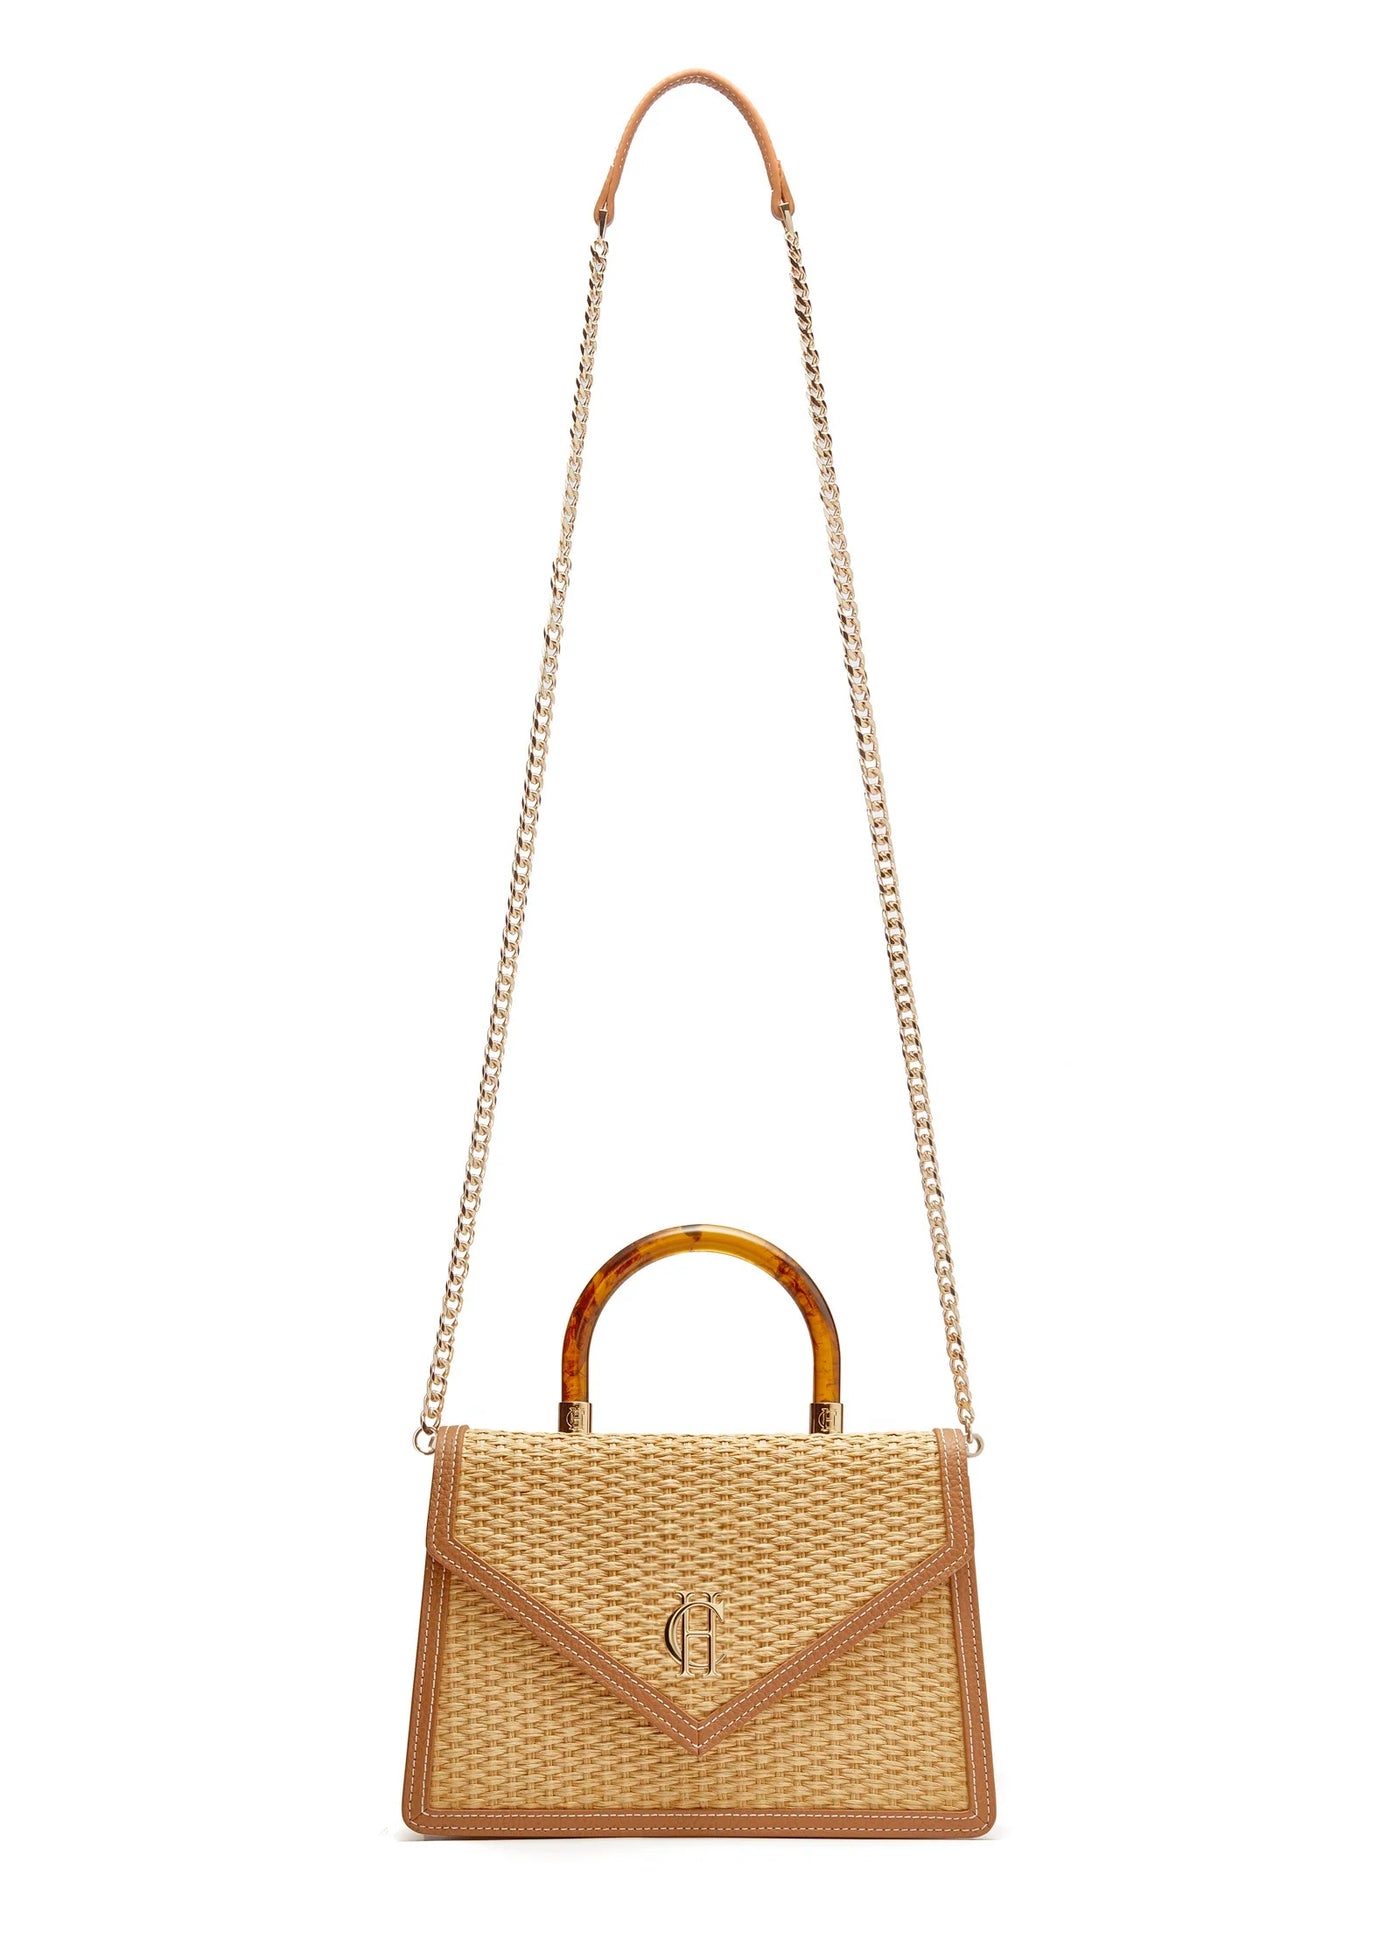 Holland Cooper Dowdeswell Bag in Tan Natural Front Shoulder Strap